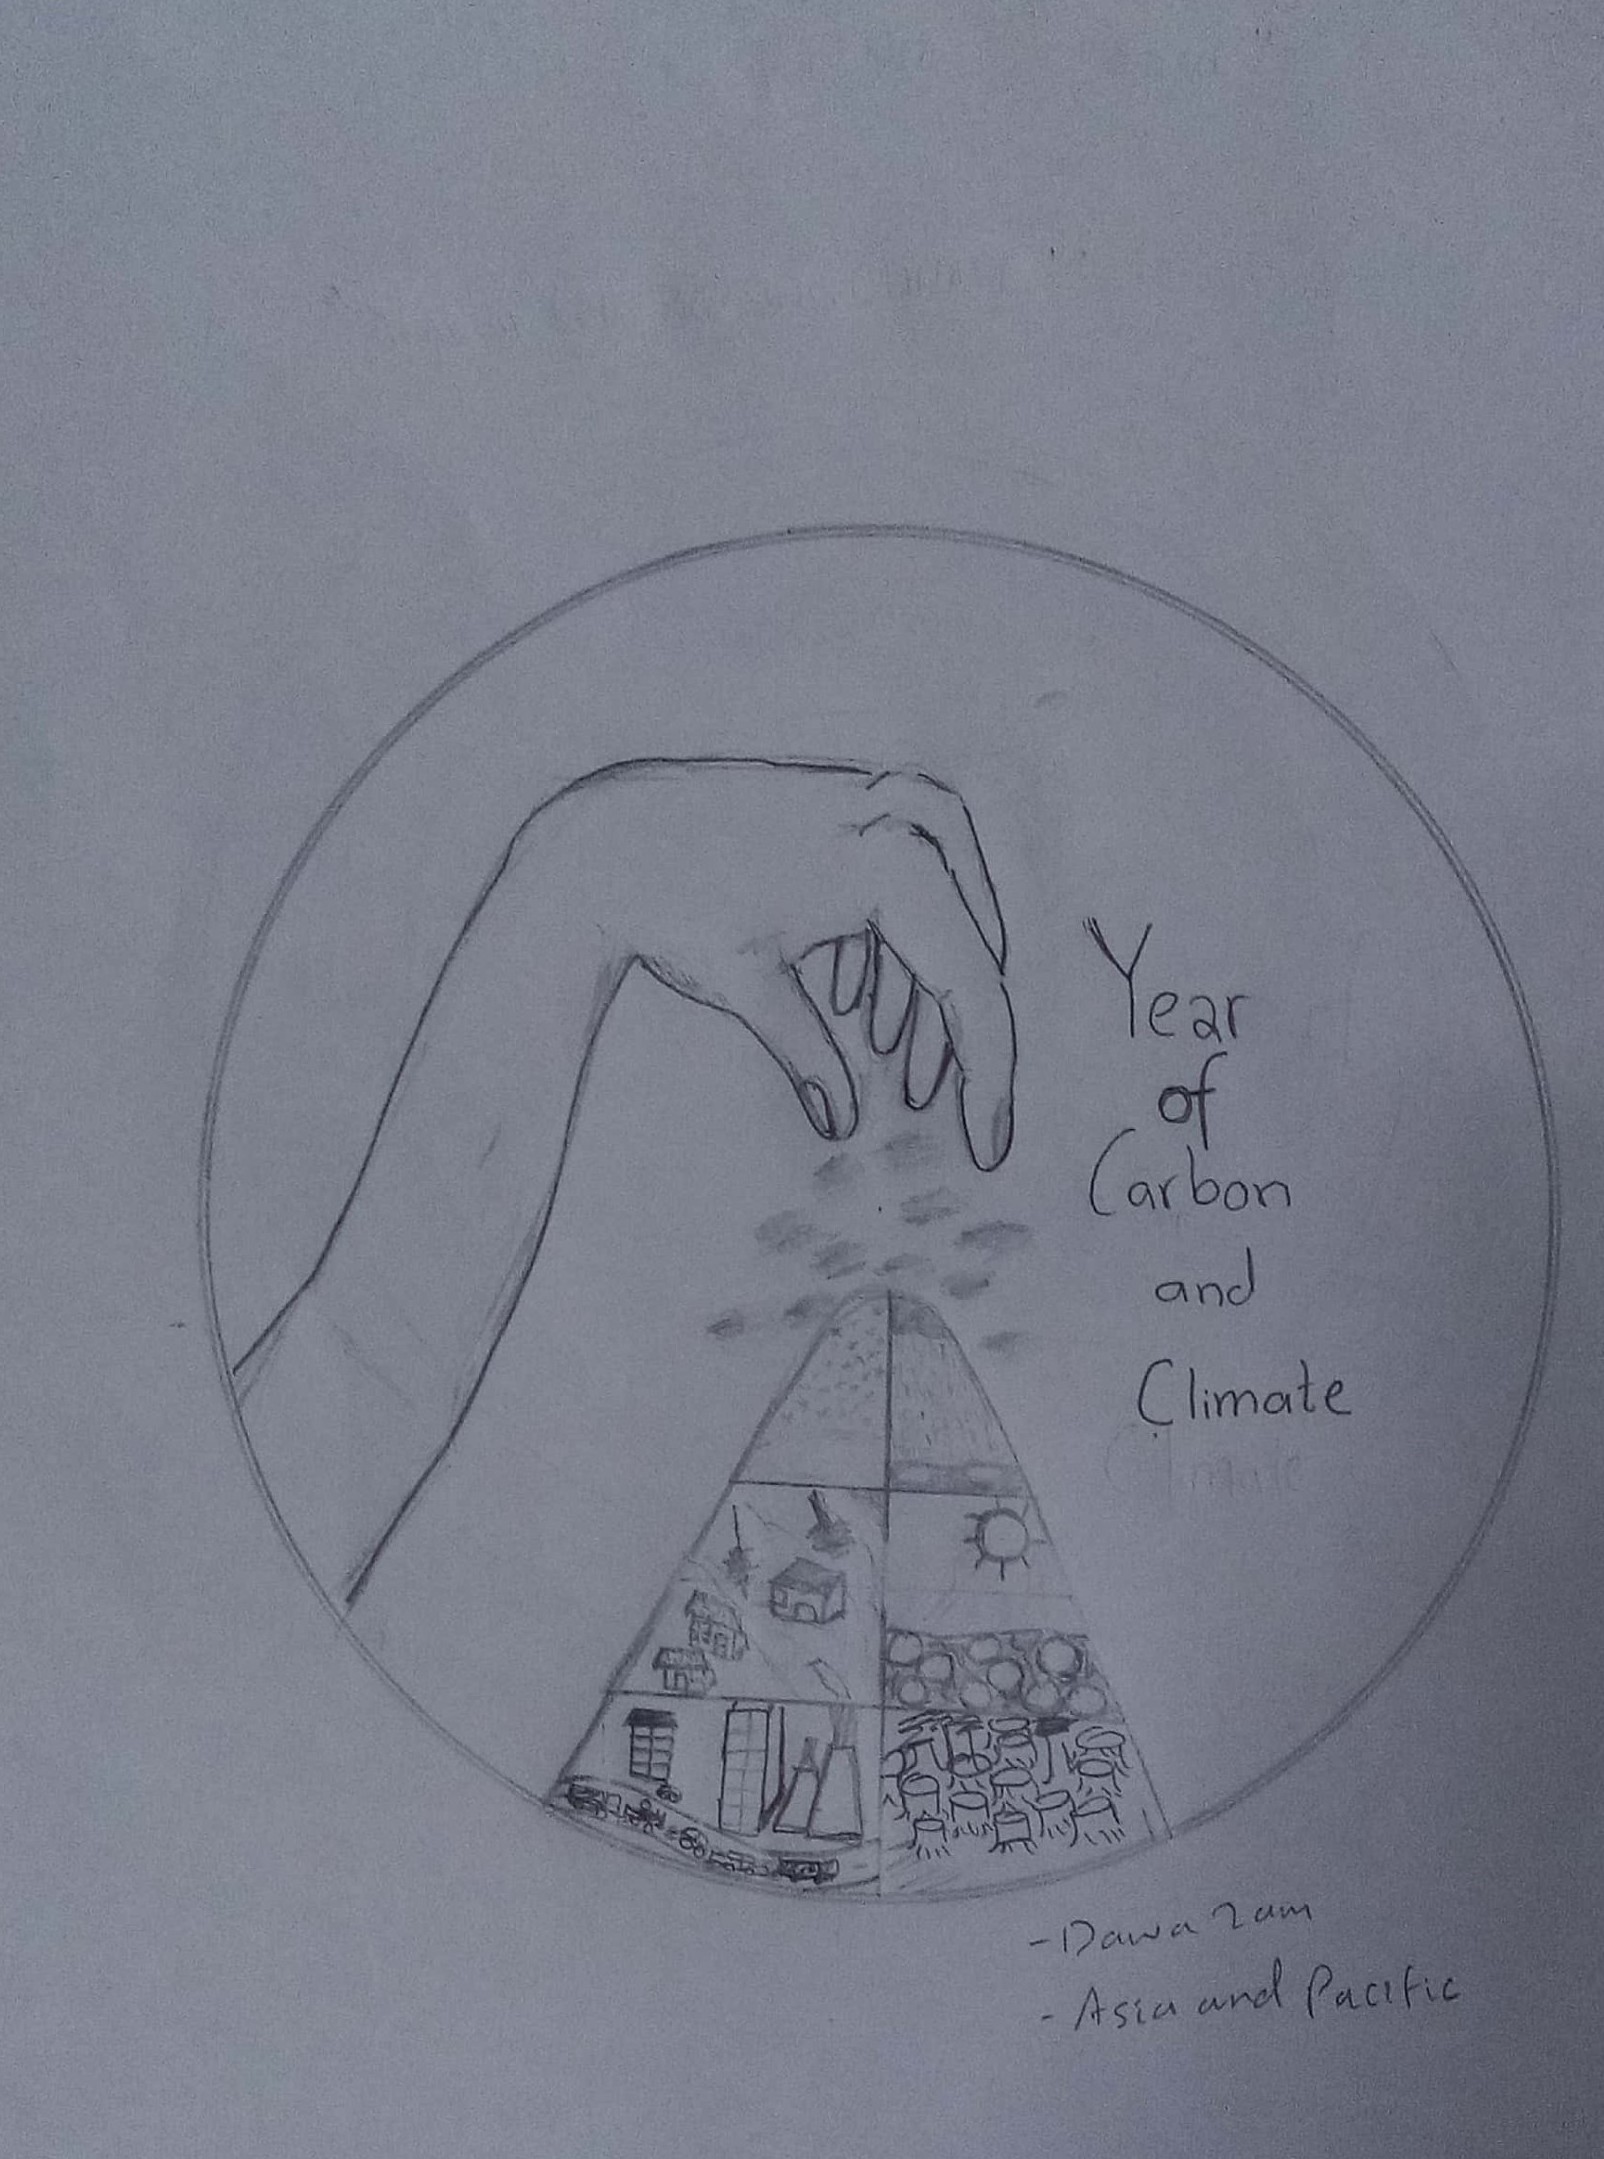 A sketch of a hand that is above a smaller sketch of a mountain depicting various climates and to the right it reads: “Year of Carbon and Climate”.